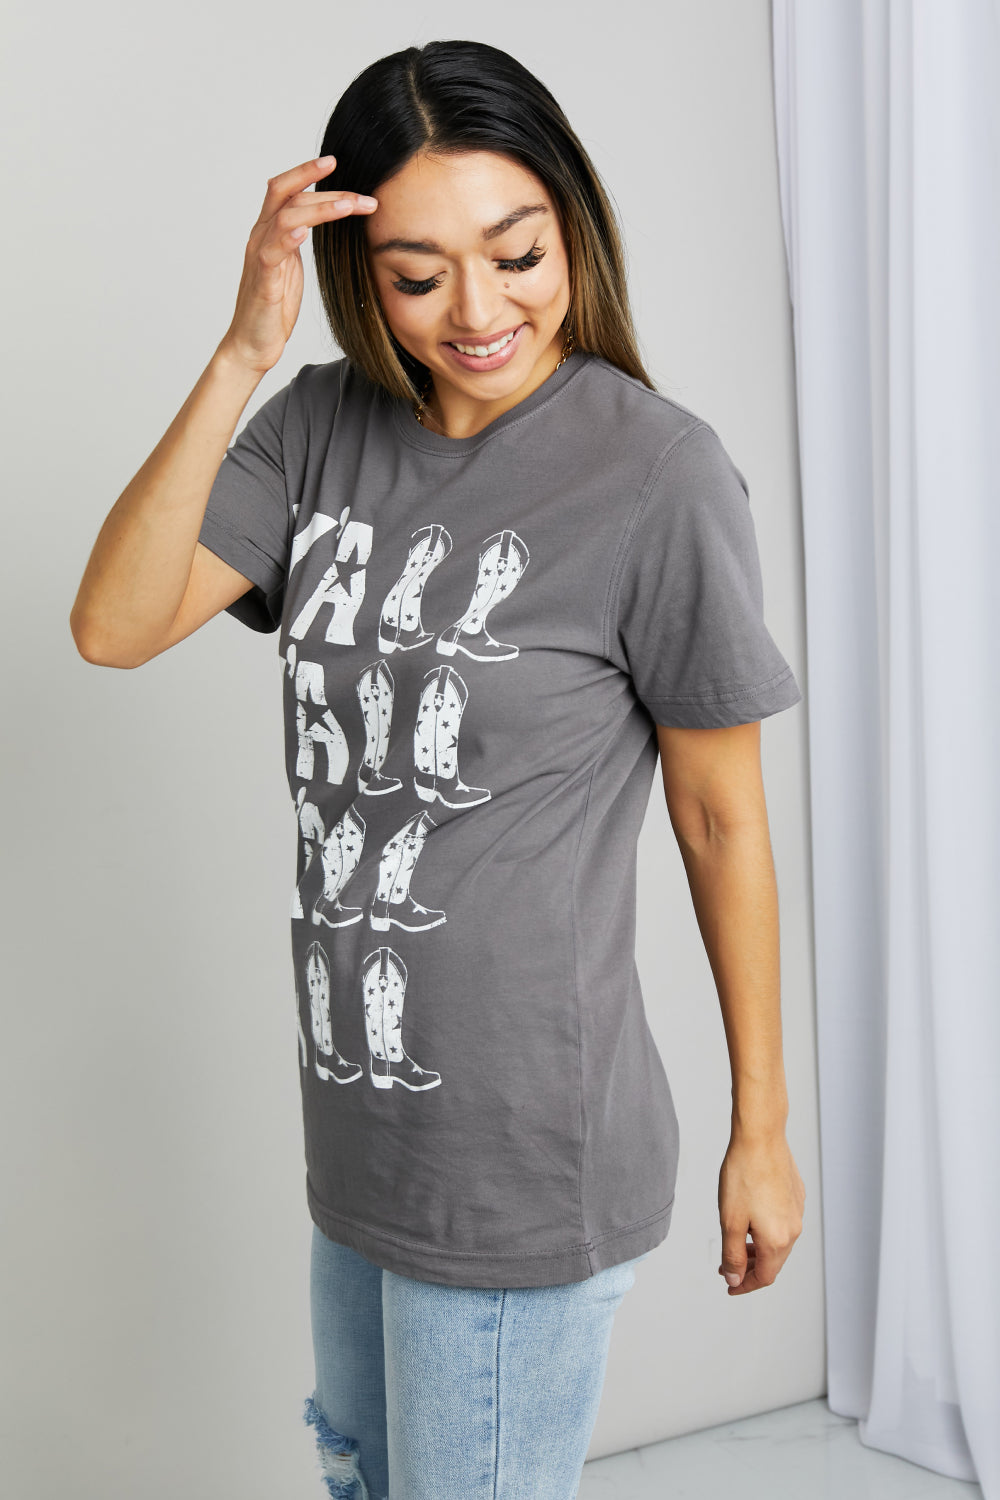 mineB Y'ALL Cowboy Boots Graphic Tee in Charcoal  Southern Soul Collectives 